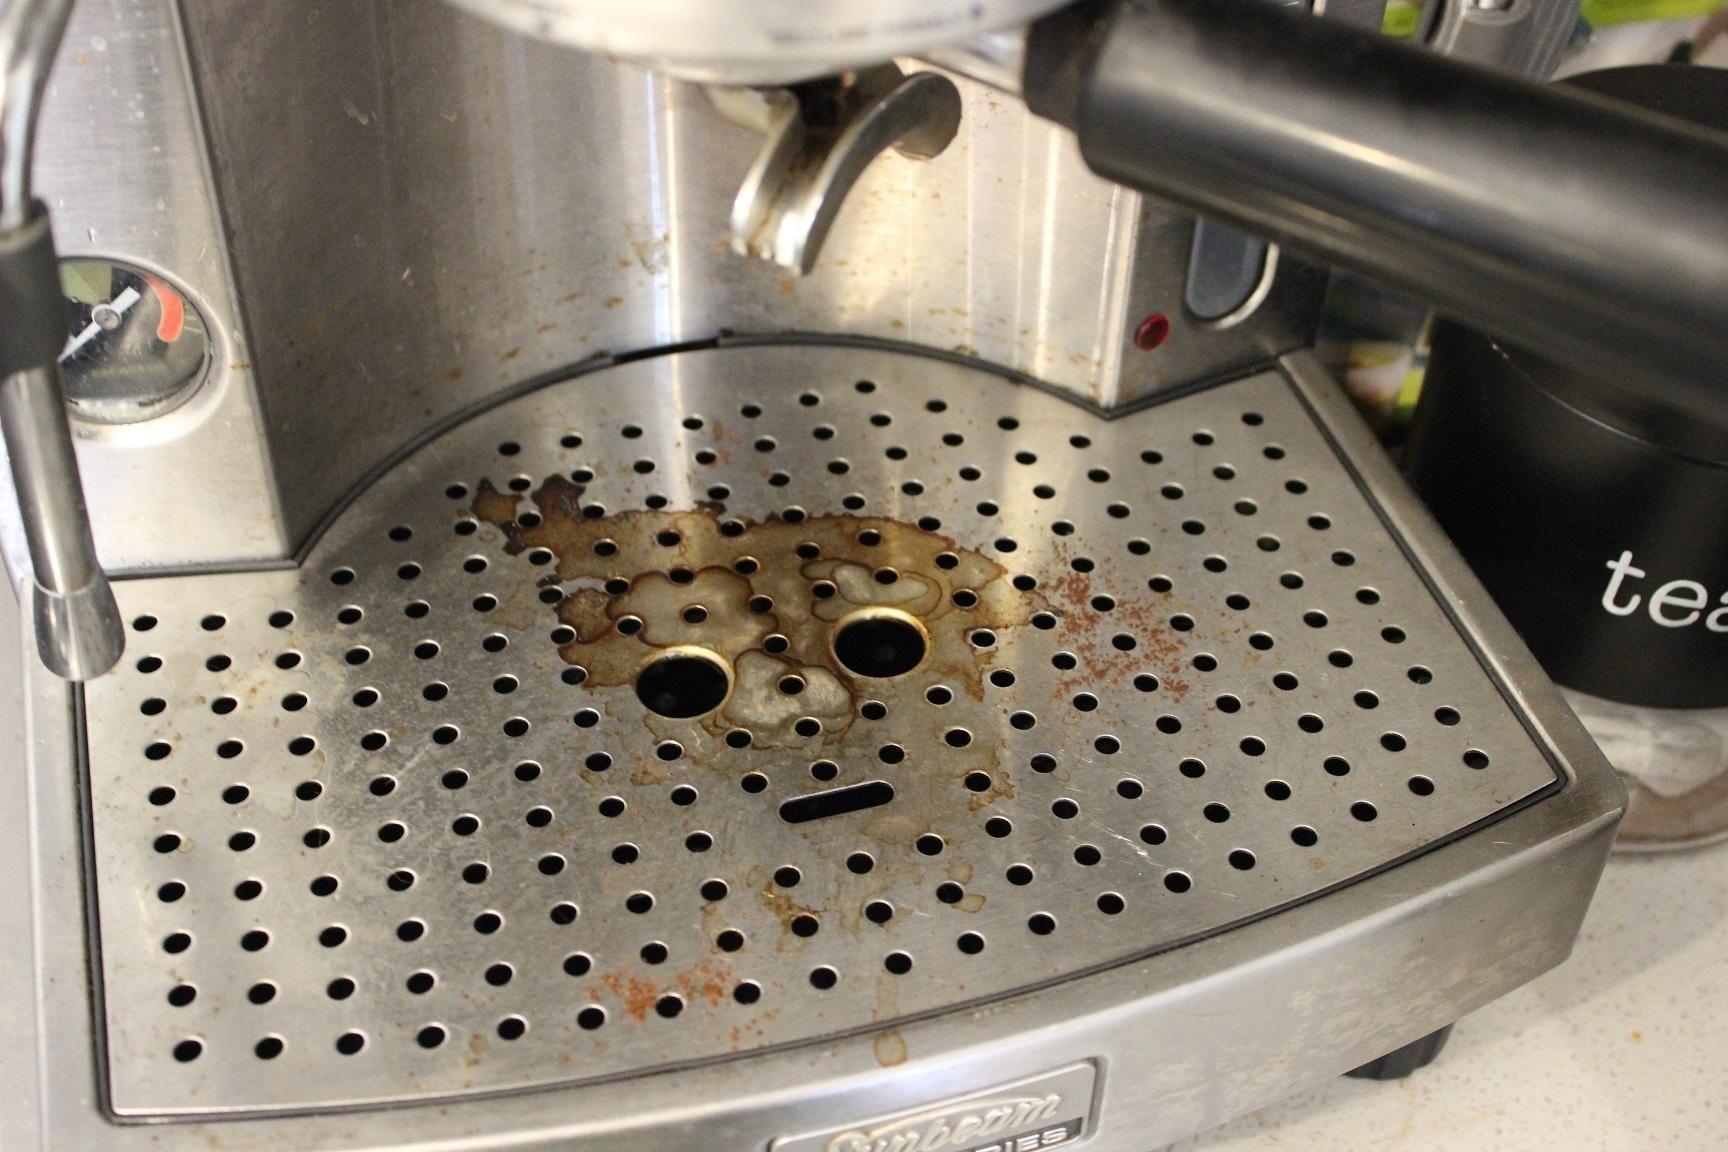 The face in the espresso machine is always watching.